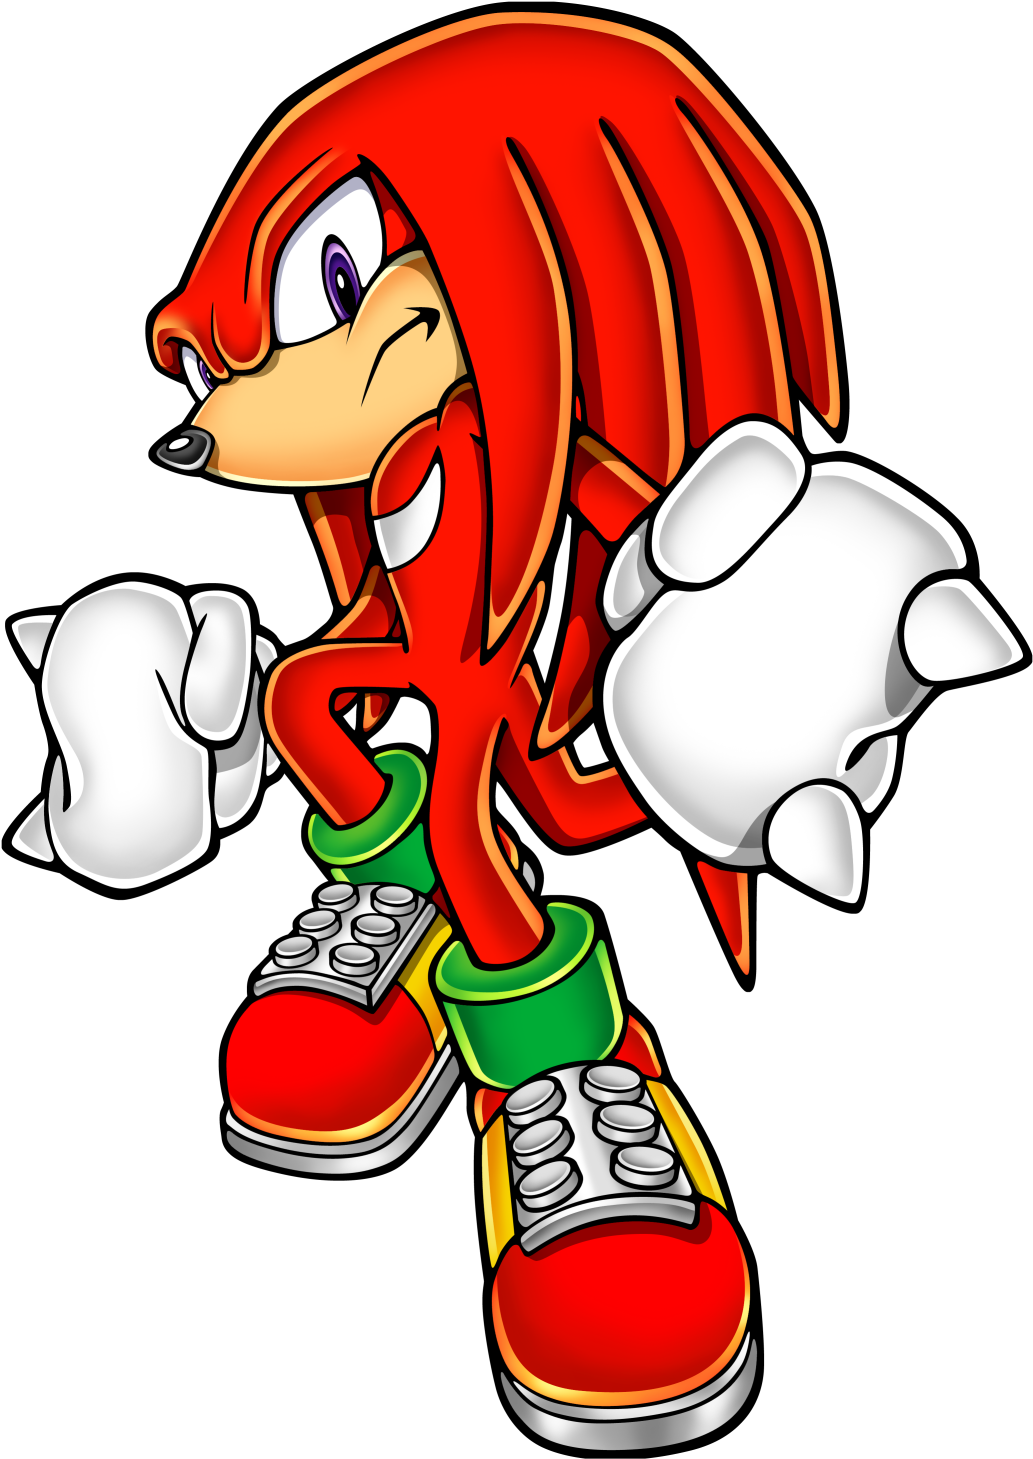 Download Knuckles The Echidna Character Art | Wallpapers.com